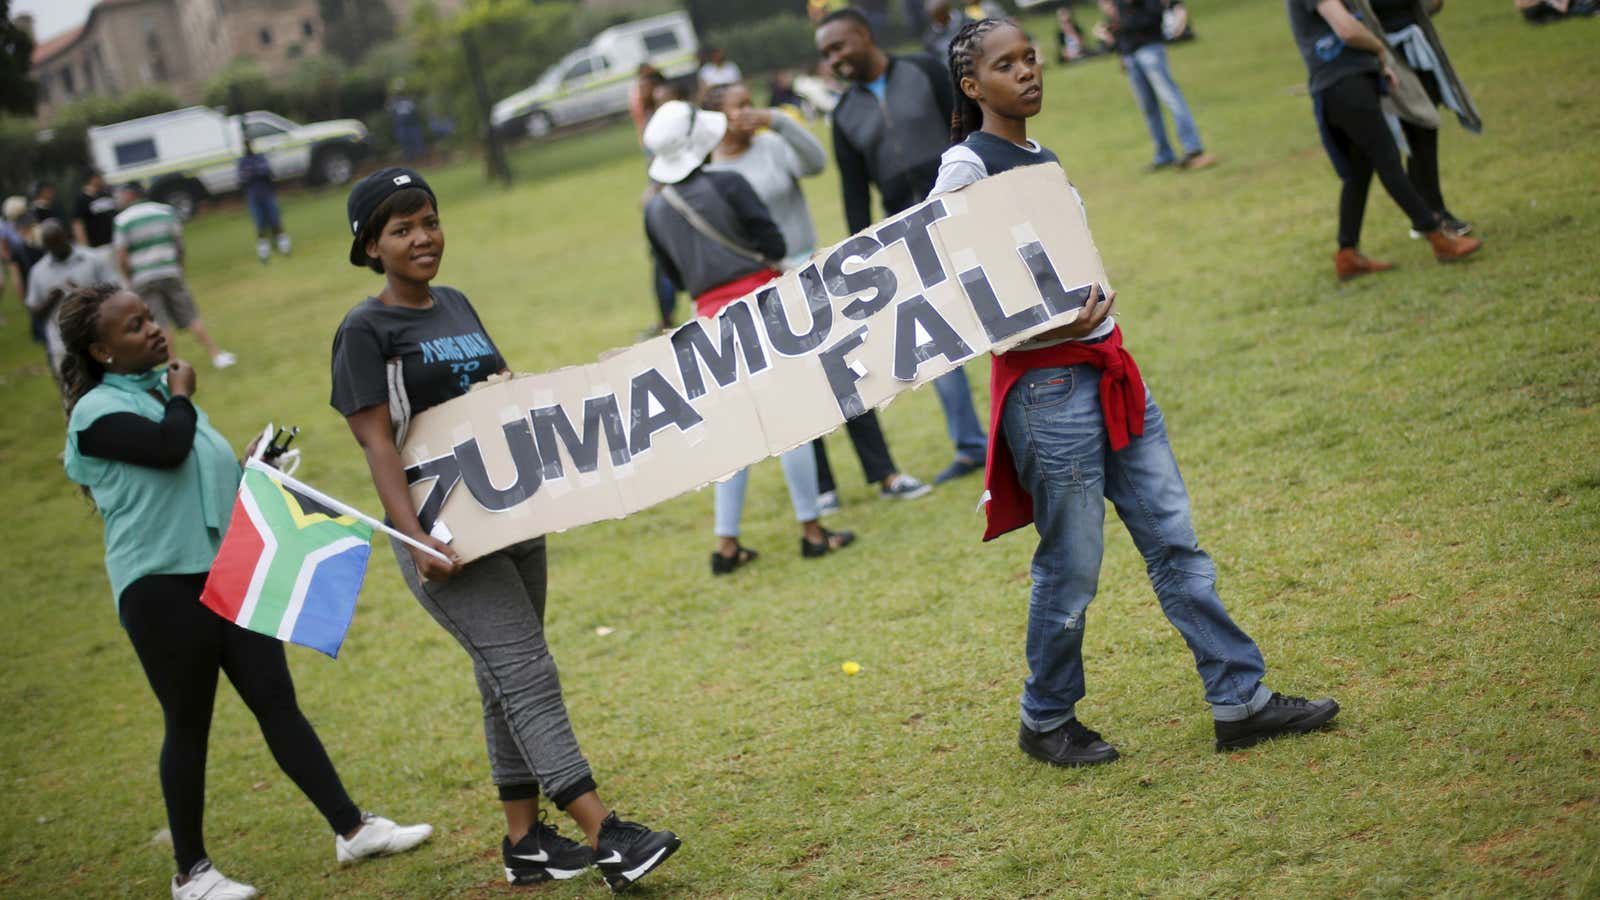 Twitter provided a platform for #ZumaMustFall protests in South Africa